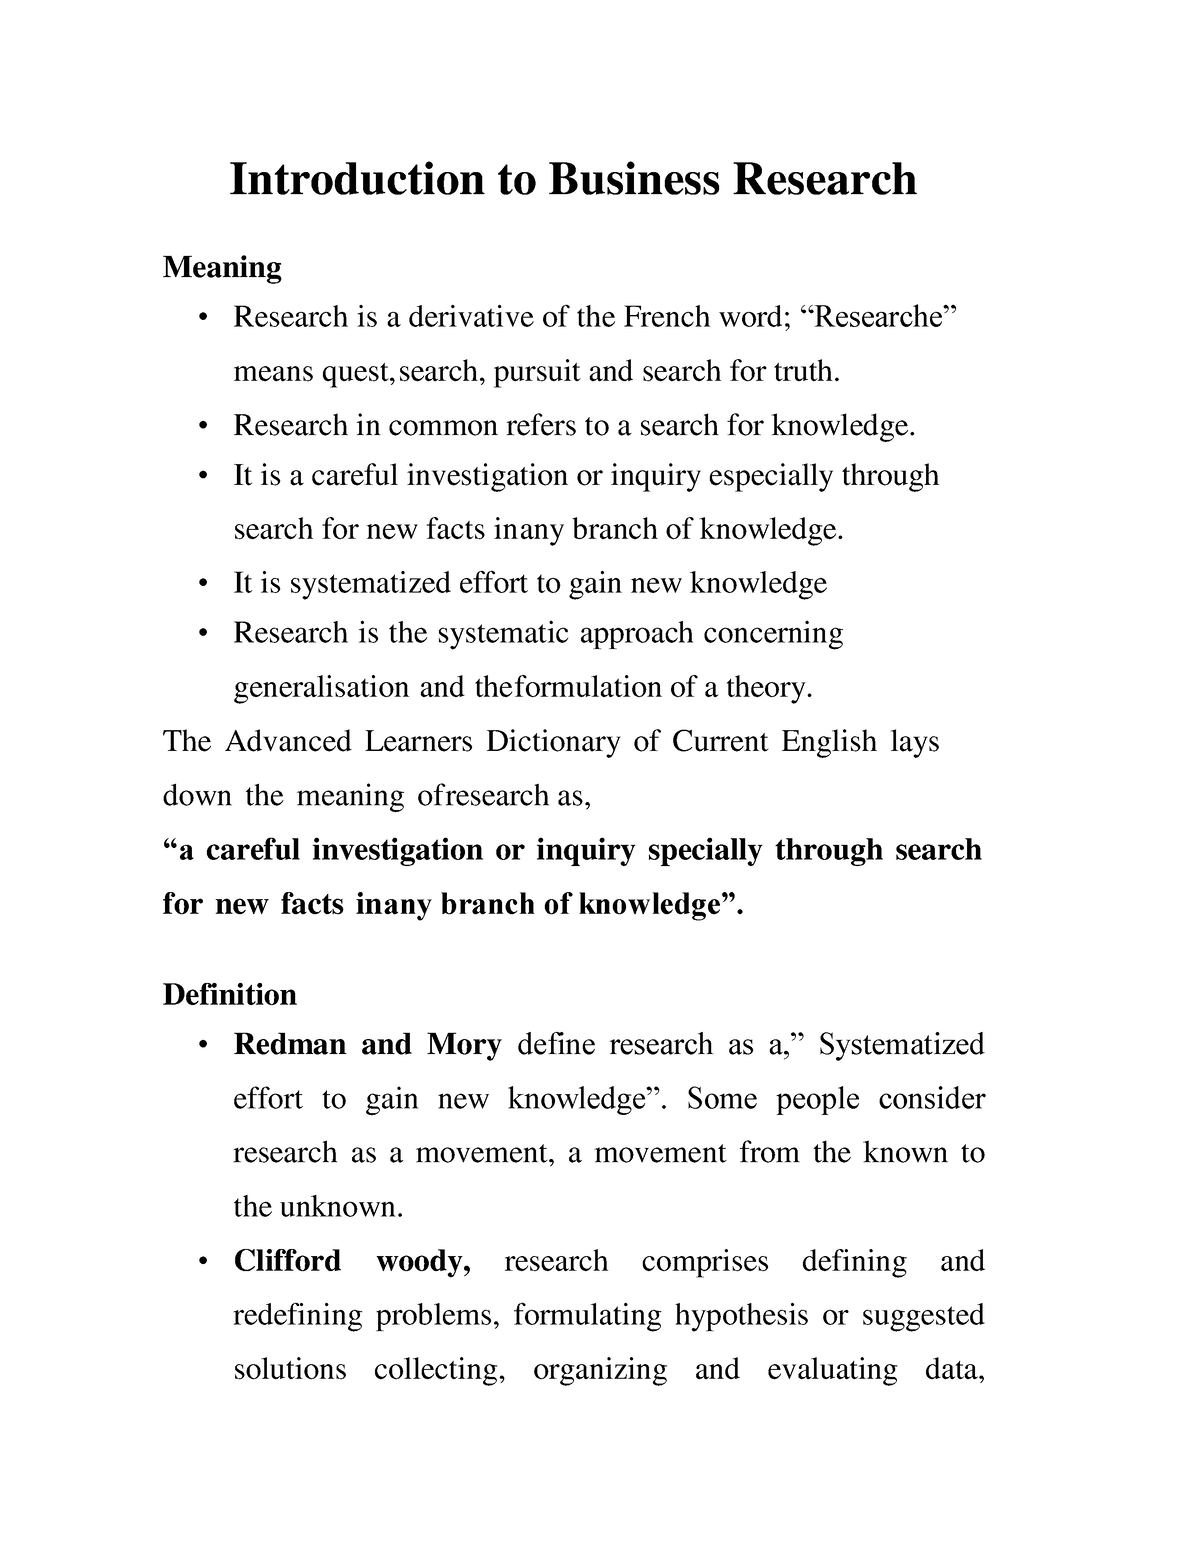 meaning of a business research